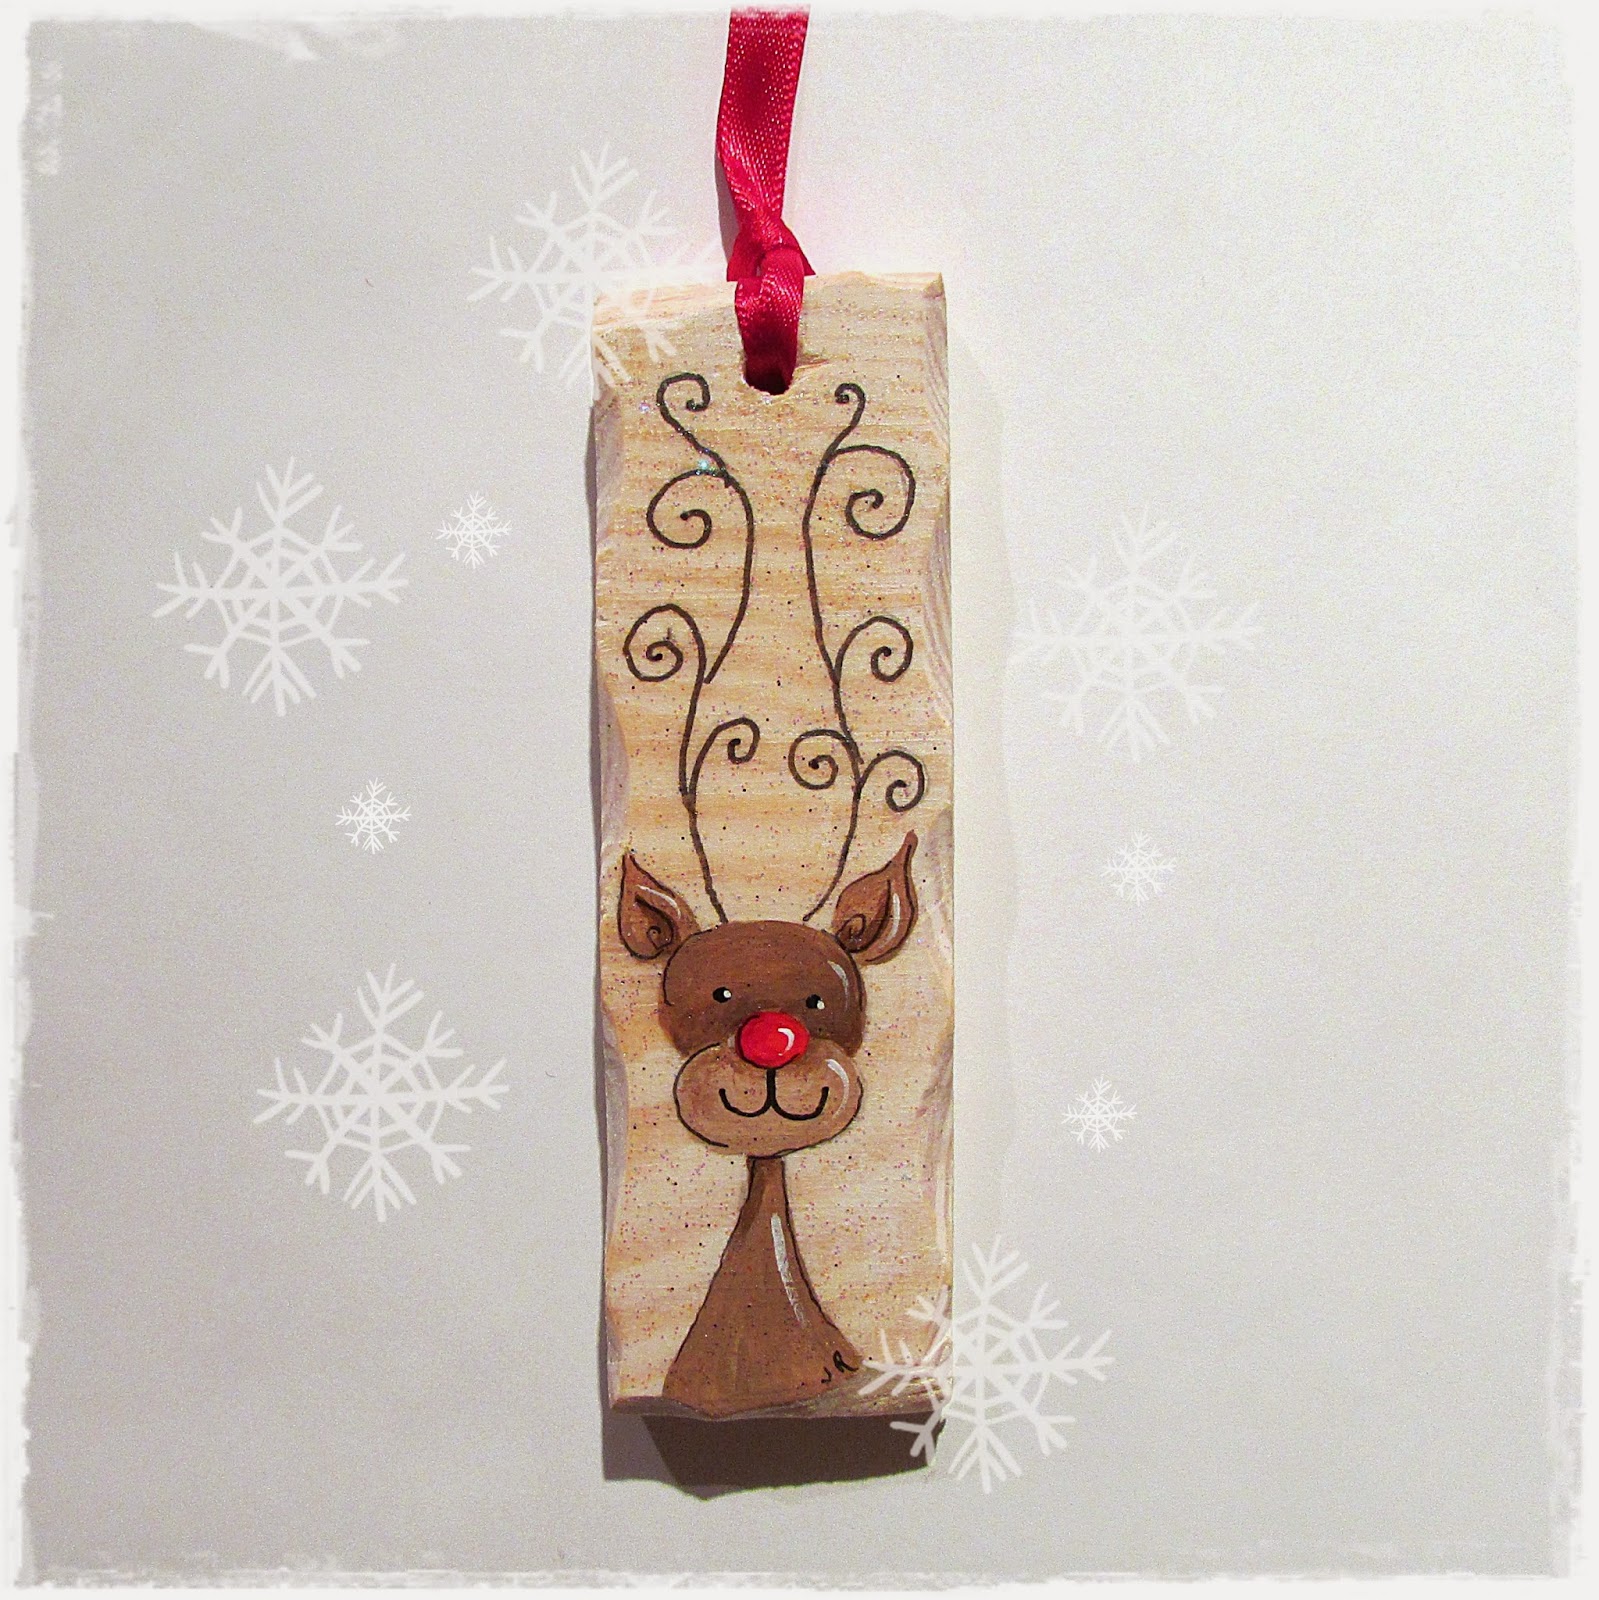 Handcrafted by Picto Rudolph the Red Nosed Reindeer & Christmas Tree